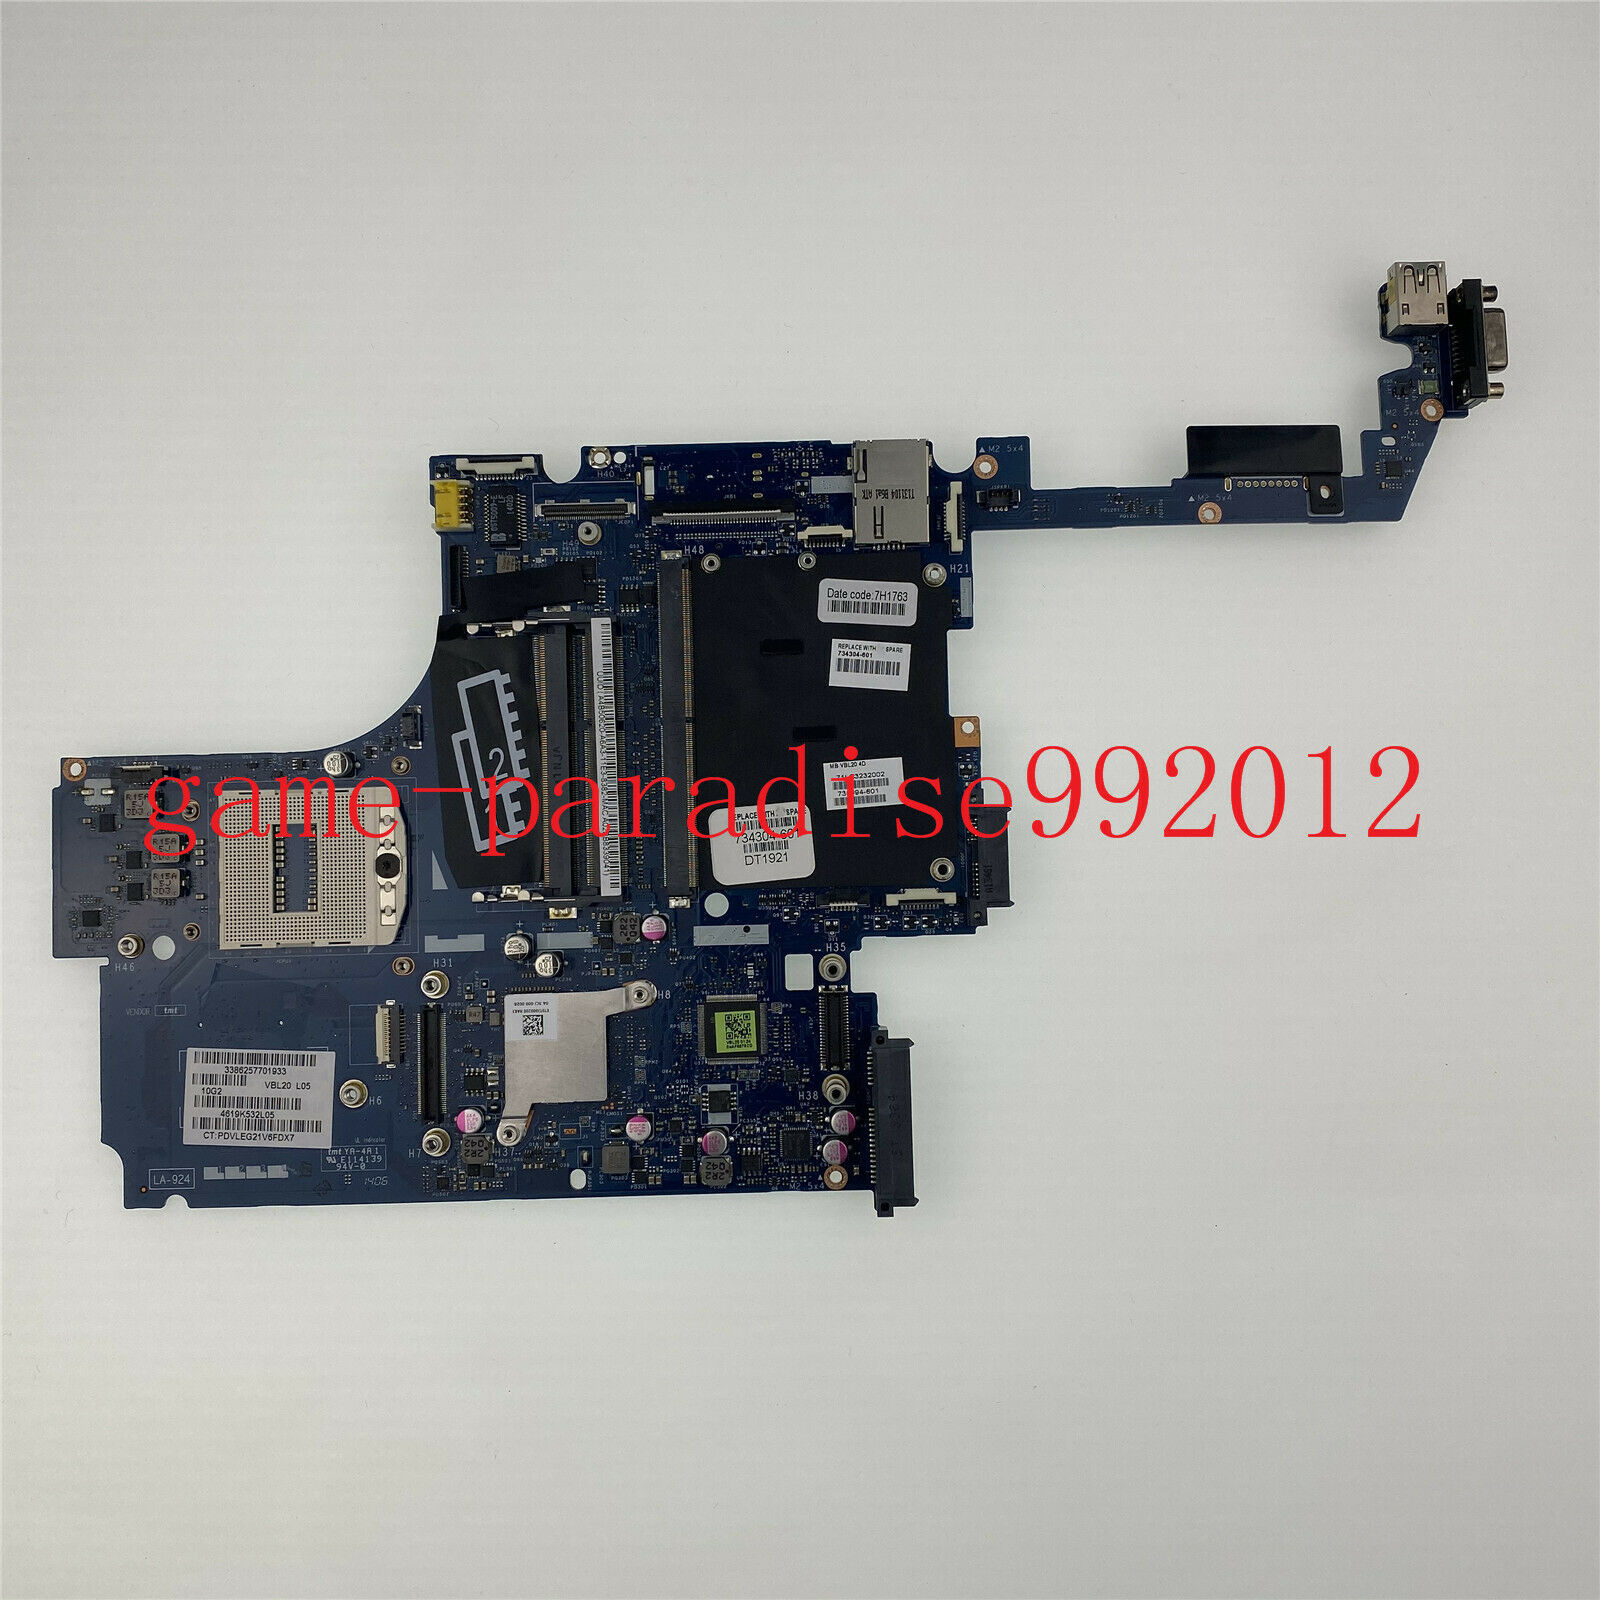 For HP ZBOOK 15 System Board Intel QM87 734304-601 laptop motherboard tested OK Brand: HP Memory Type: DDR3 - Click Image to Close